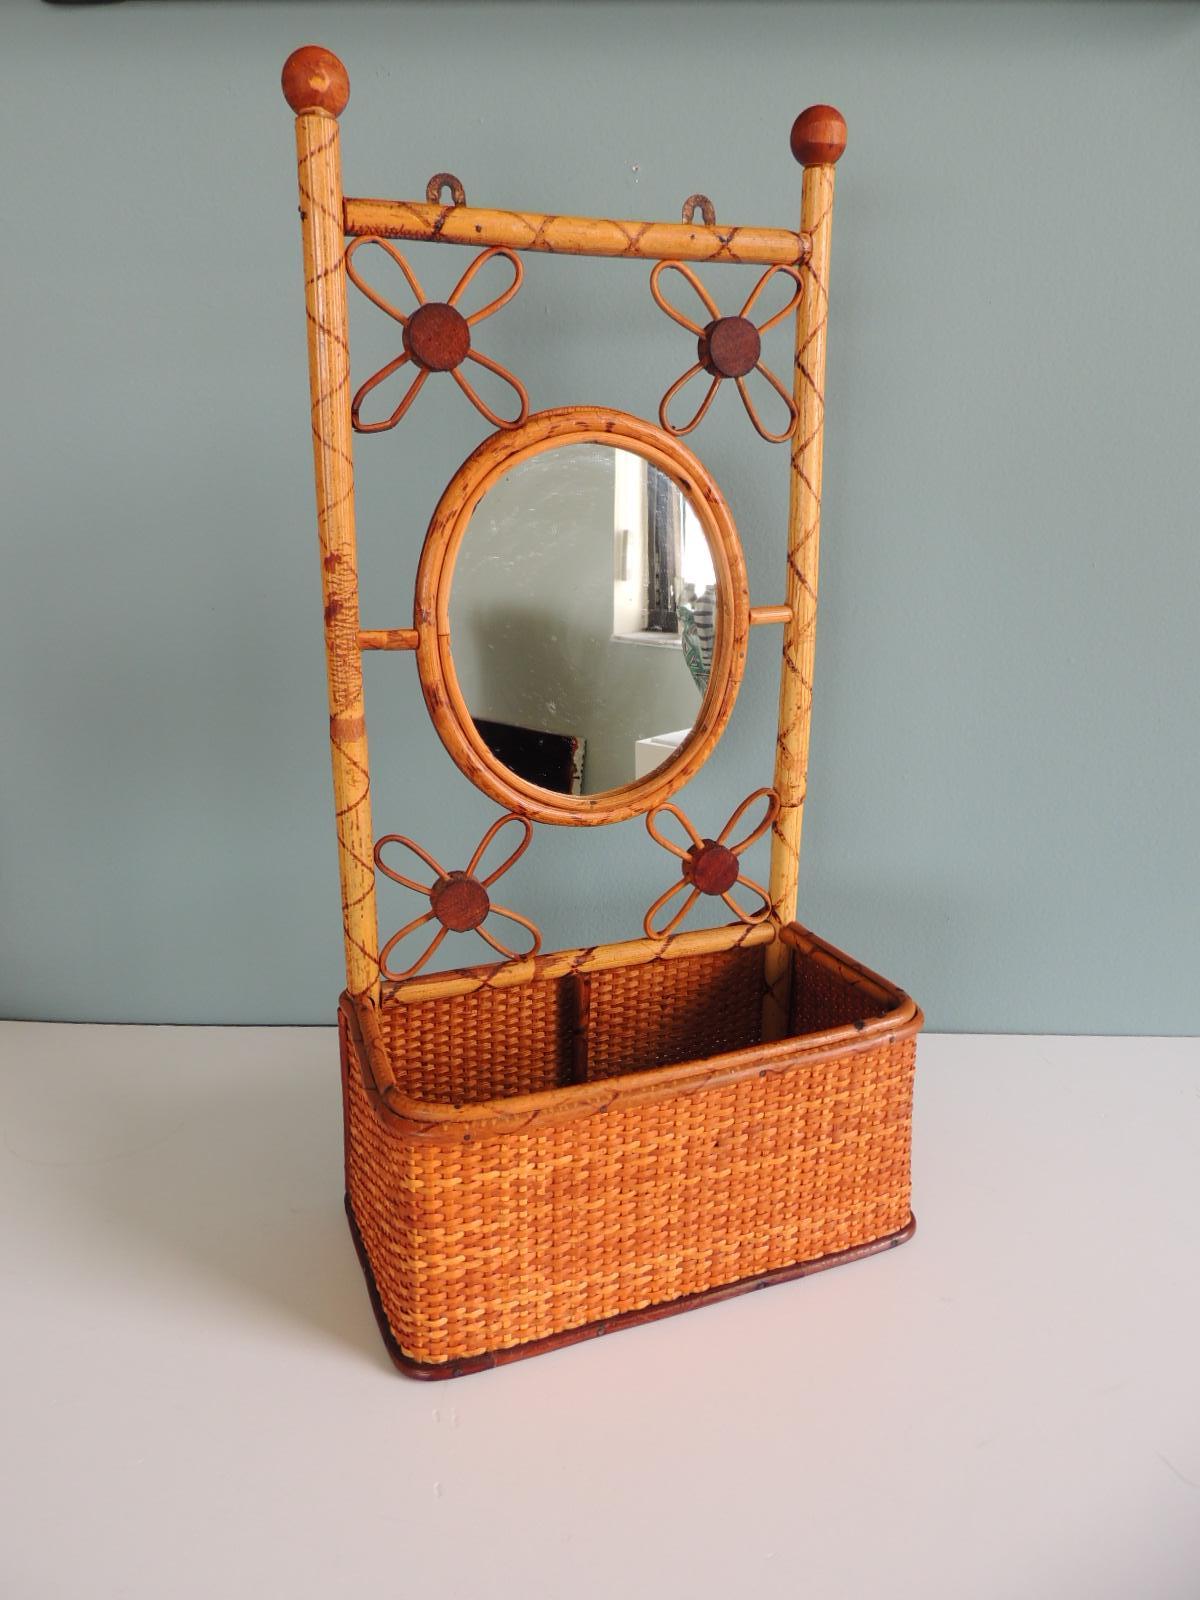 Vintage bamboo and rattan wall shelf
Shelf with basket for mail or keys
Small oval mirror and flowers' details. 
Tortoise surface finish. 
Hanging hooks in the back.
Size: 9.5